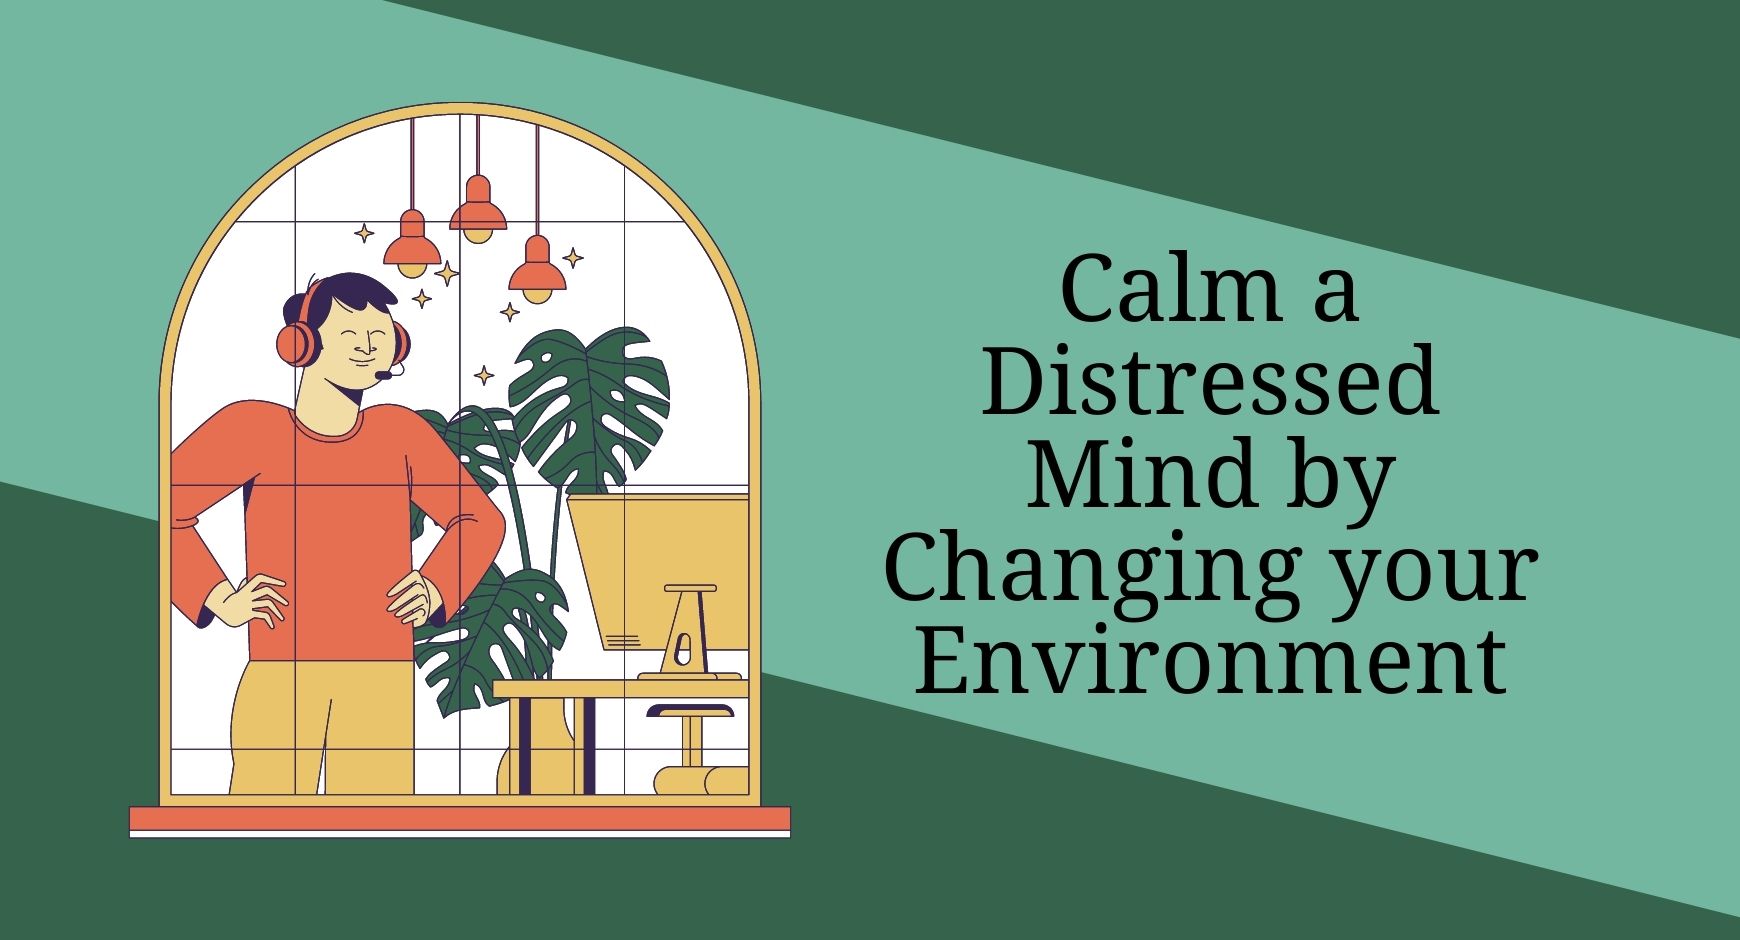 A smiling man seen through a window next to a computer and a plant next to words that read "Calm a Distressed Mind by Changing your Environment"